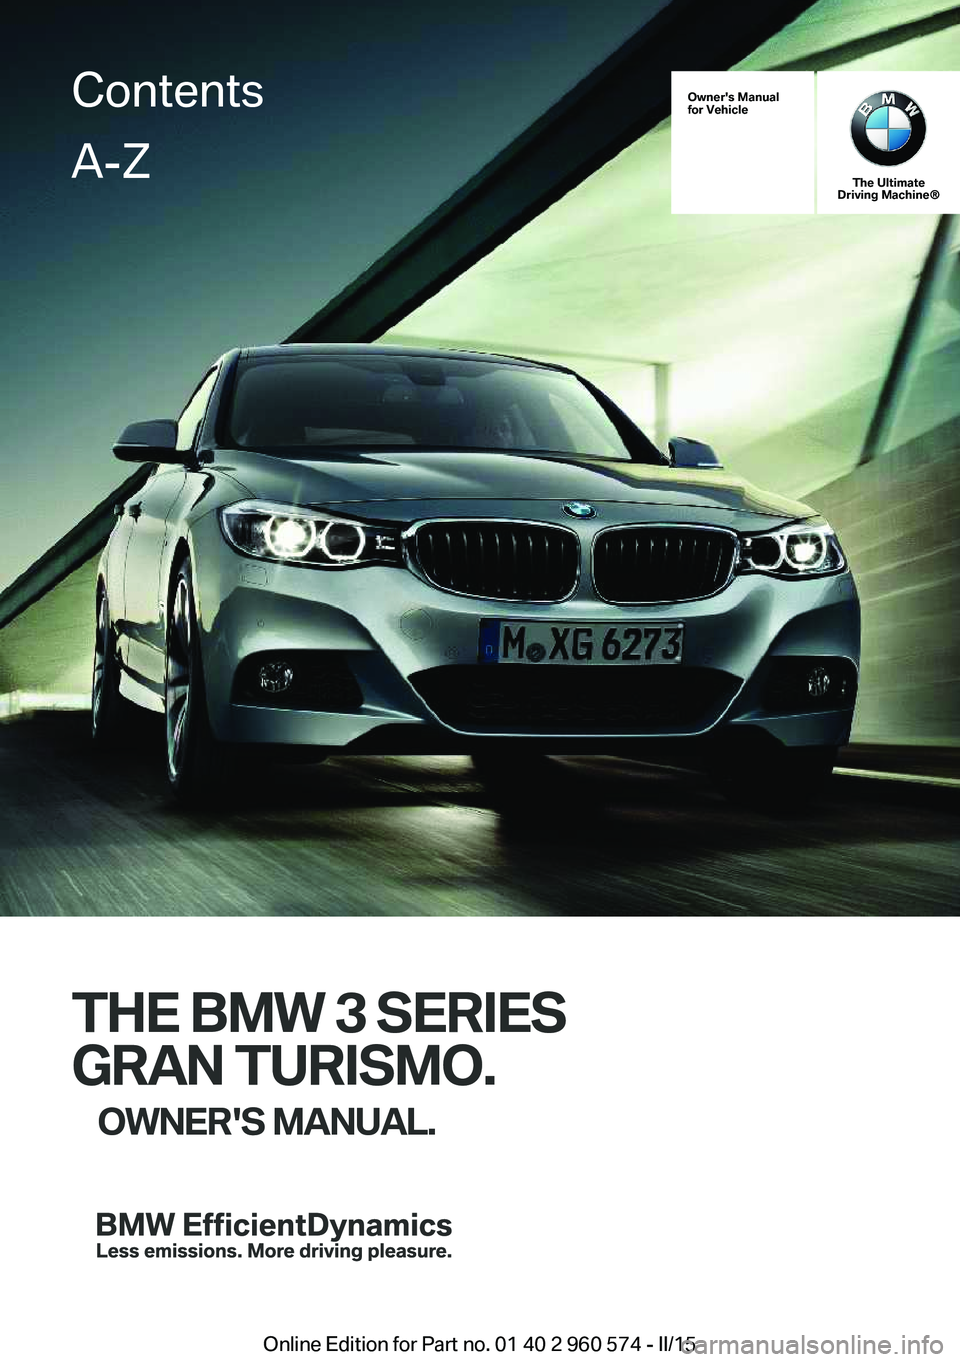 BMW 335I XDRIVE GRAN TURISMO 2016  Owners Manual Owner's Manual
for Vehicle
The Ultimate
Driving Machine®
THE BMW 3 SERIES
GRAN TURISMO. OWNER'S MANUAL.
ContentsA-Z
Online Edition for Part no. 01 40 2 960 574 - II/15   